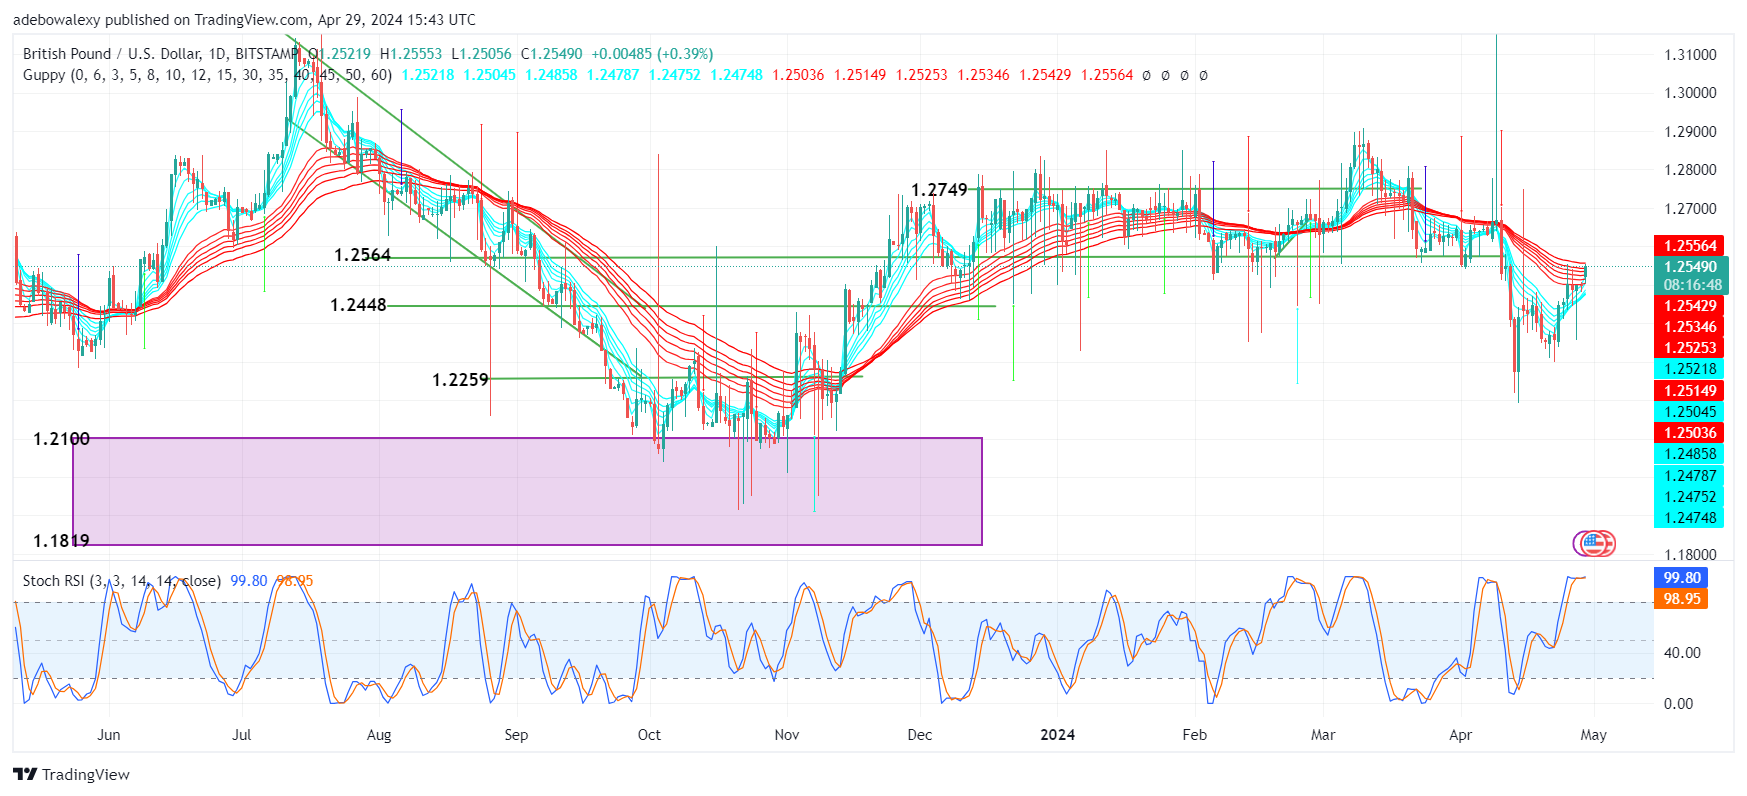 GBPUSD Benefits From Market Participants' Expectations